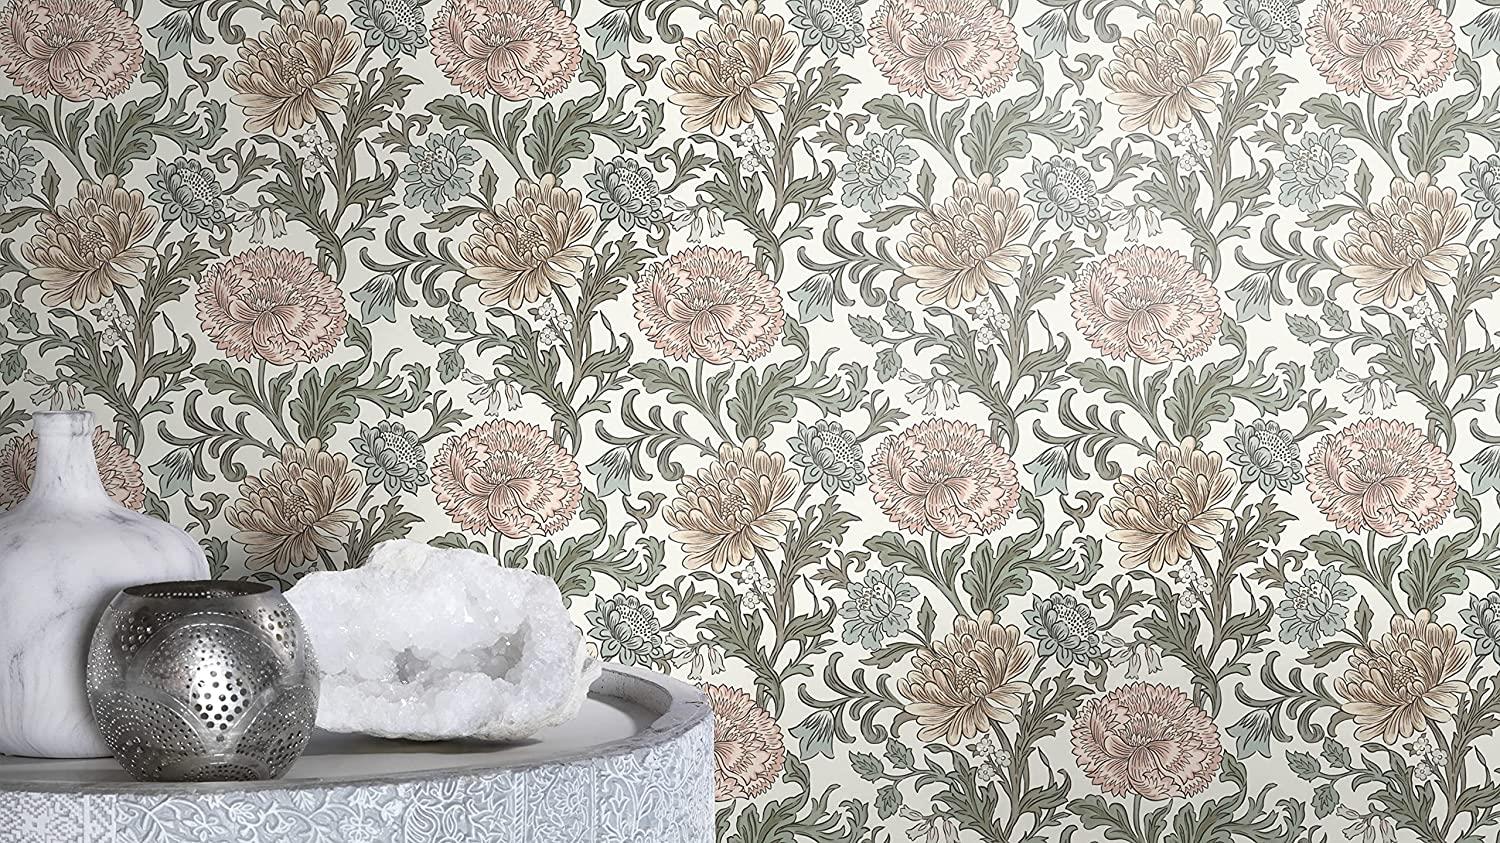 Rasch Wallpaper 553130 - Colourful Non-Woven Wallpaper from The Salisbury Collection with Flower Motif in Various Colours on White Background with Slightly Structure - 10.05 m x 53 cm (L x W)